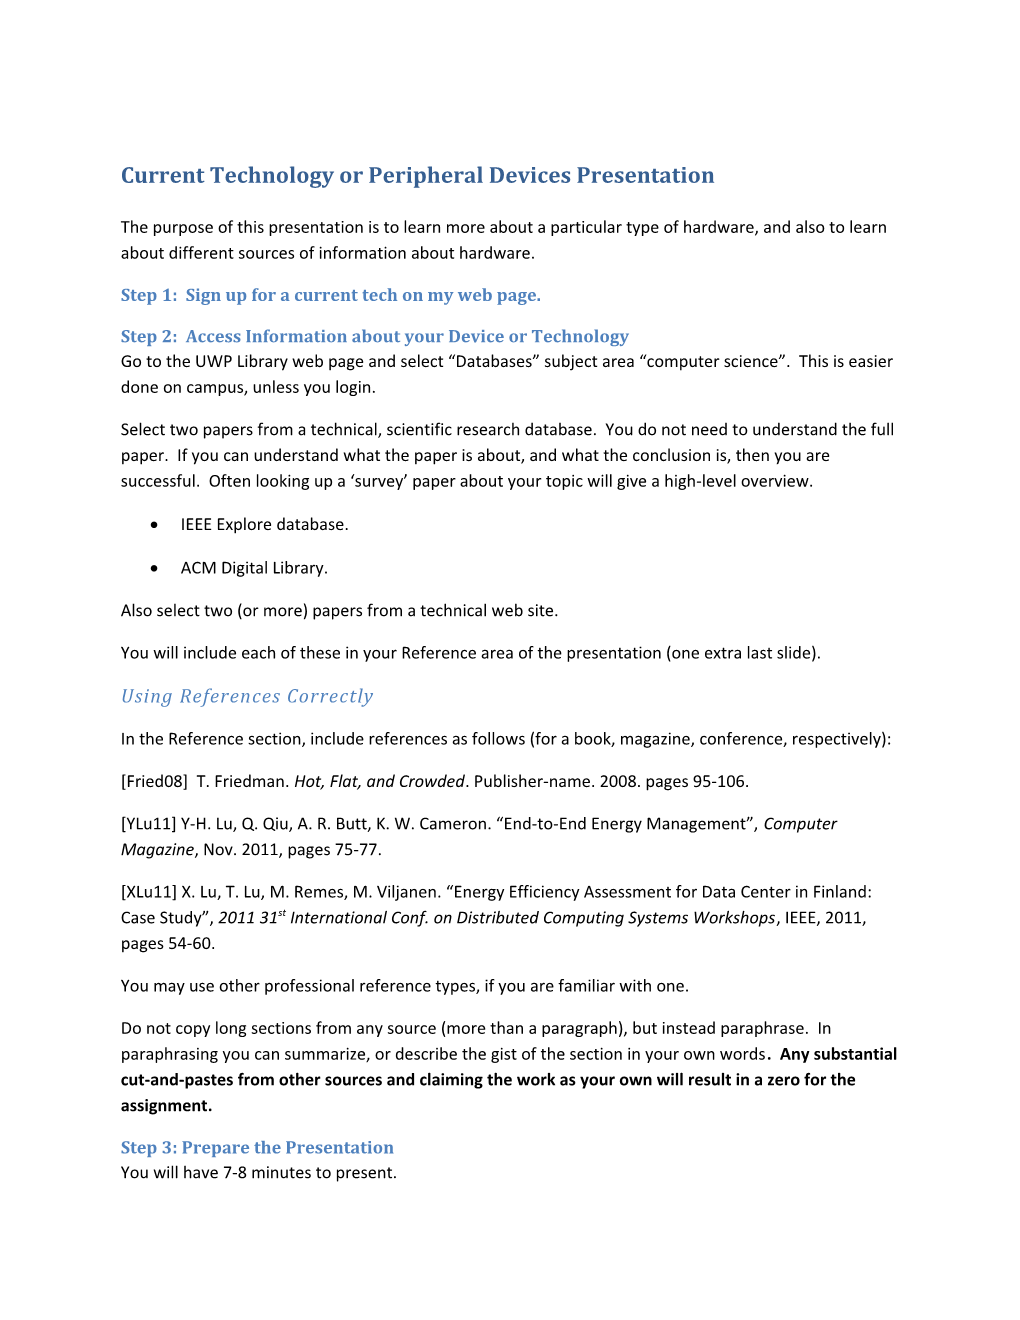 Current Technology Or Peripheral Devices Presentation